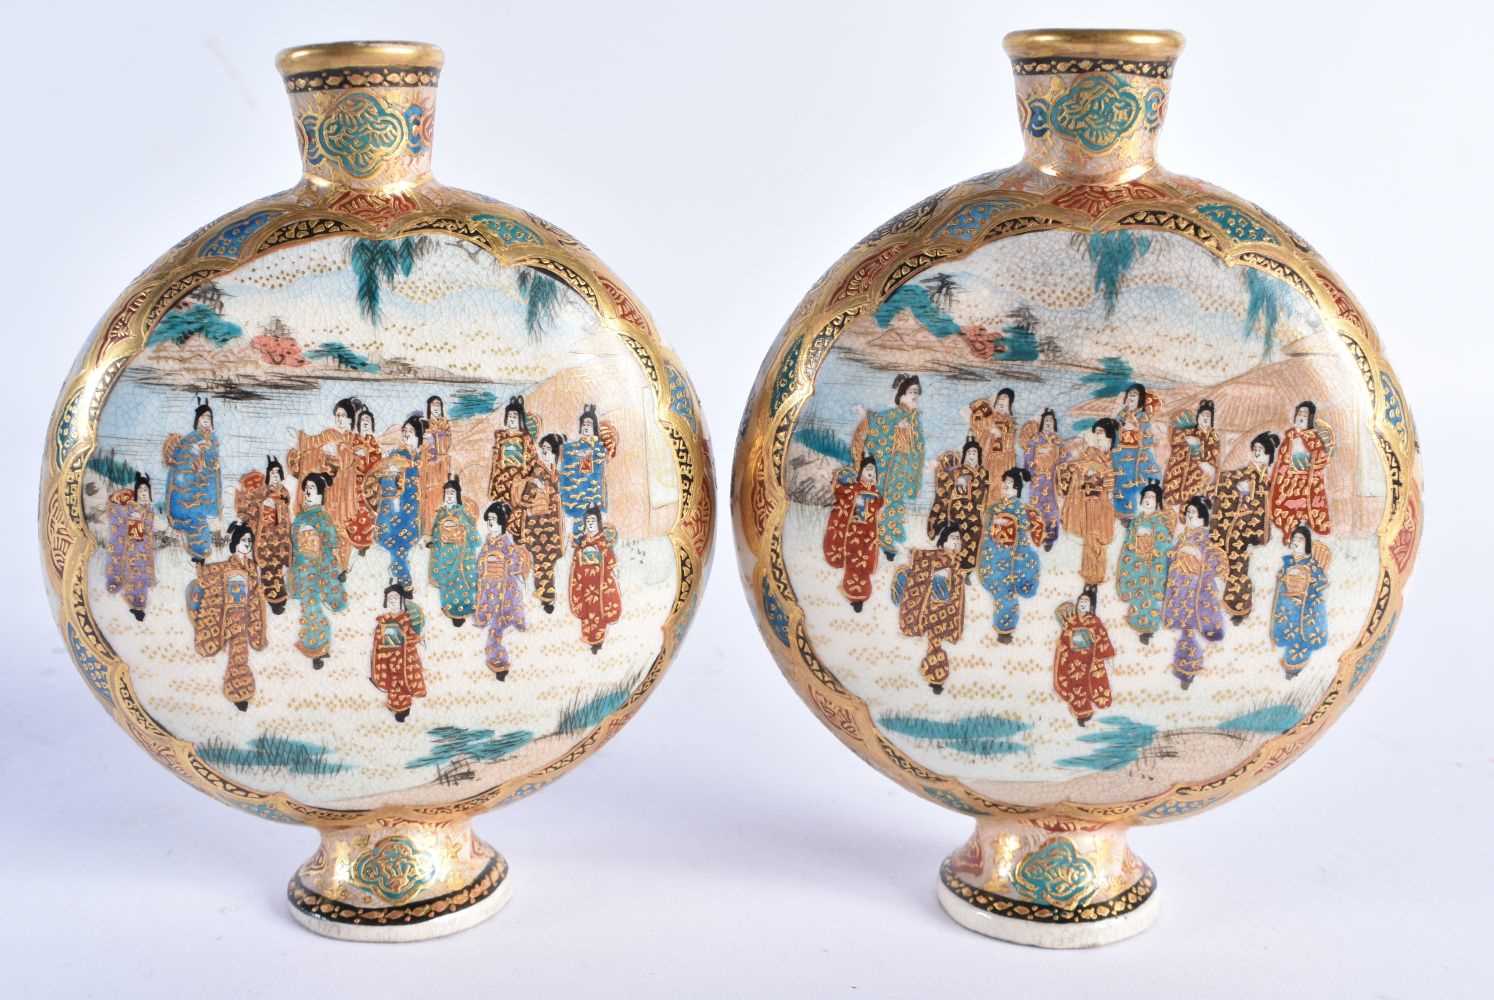 A PAIR OF 19TH CENTURY JAPANESE MEIJI PERIOD SATSUMA MOON FLASKS by Shimazu, painted with numerous - Image 5 of 7